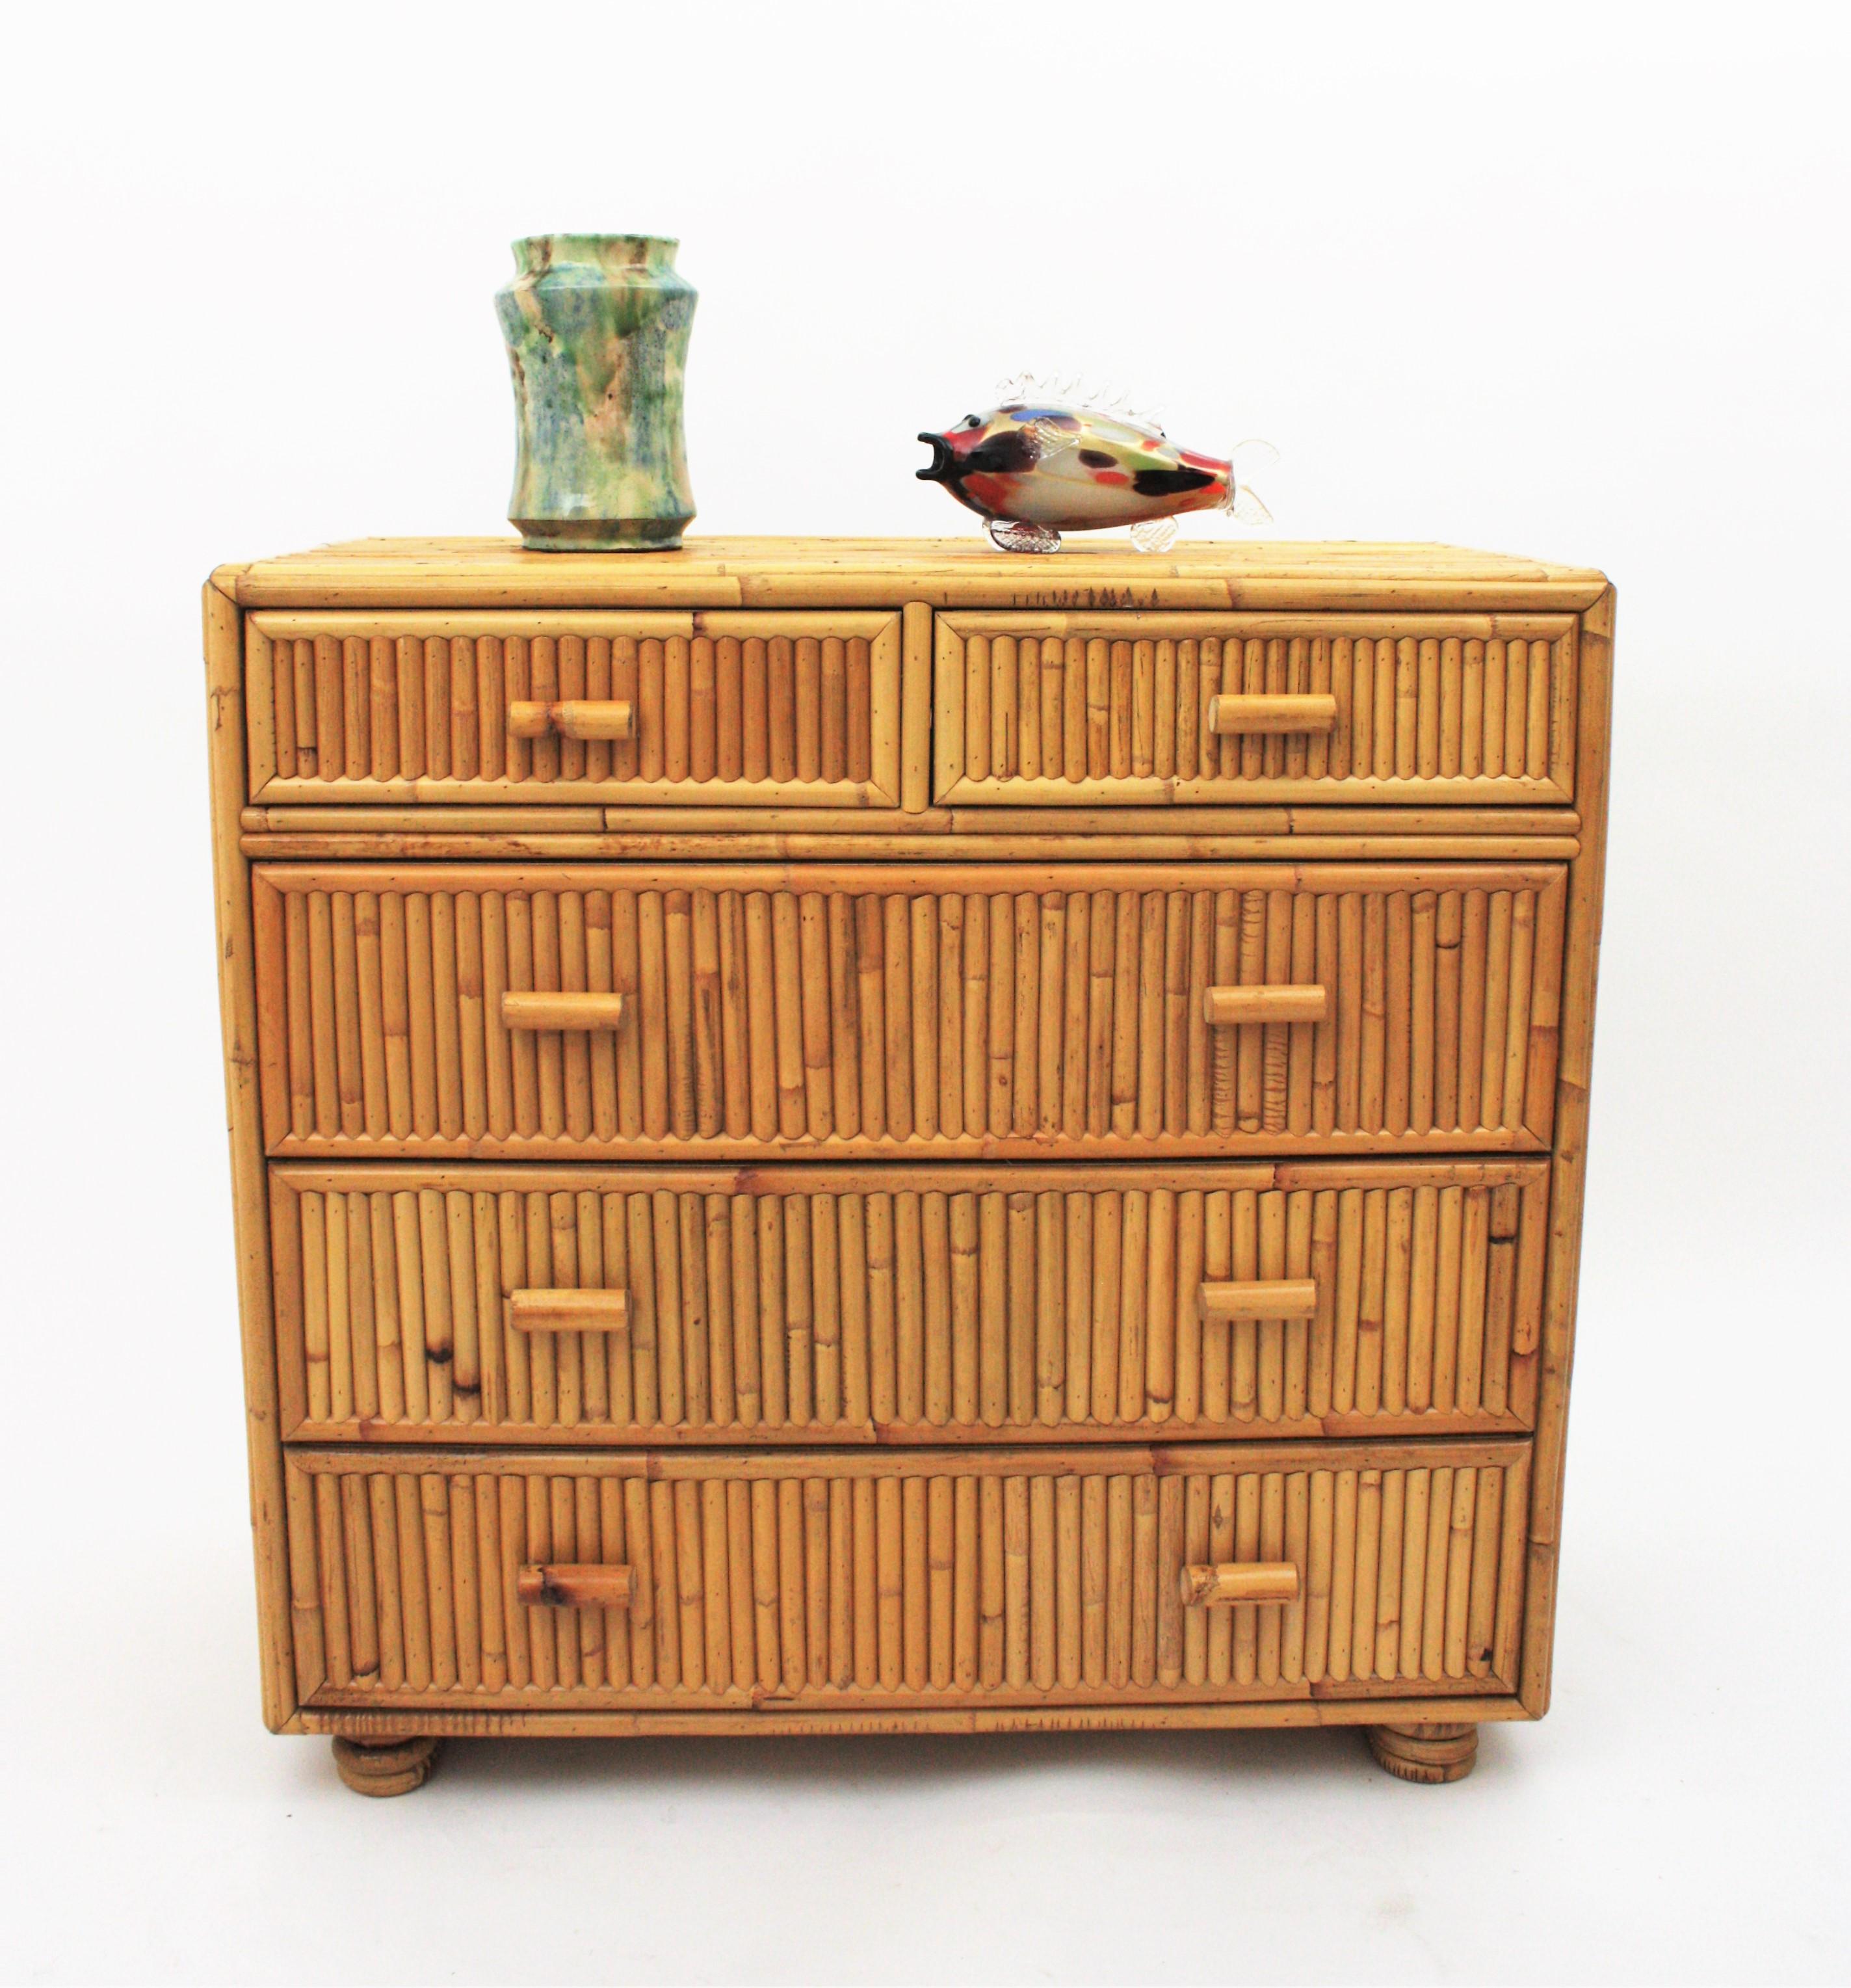 Spanish modernist rattan bamboo five-drawer chest or commode, 1970s
Nice Mid-Century Modern split reed rattan and bamboo commode or chest of drawers.
All made with wood covered with bamboo canes.
This beautiful commode has 5 drawers accented by